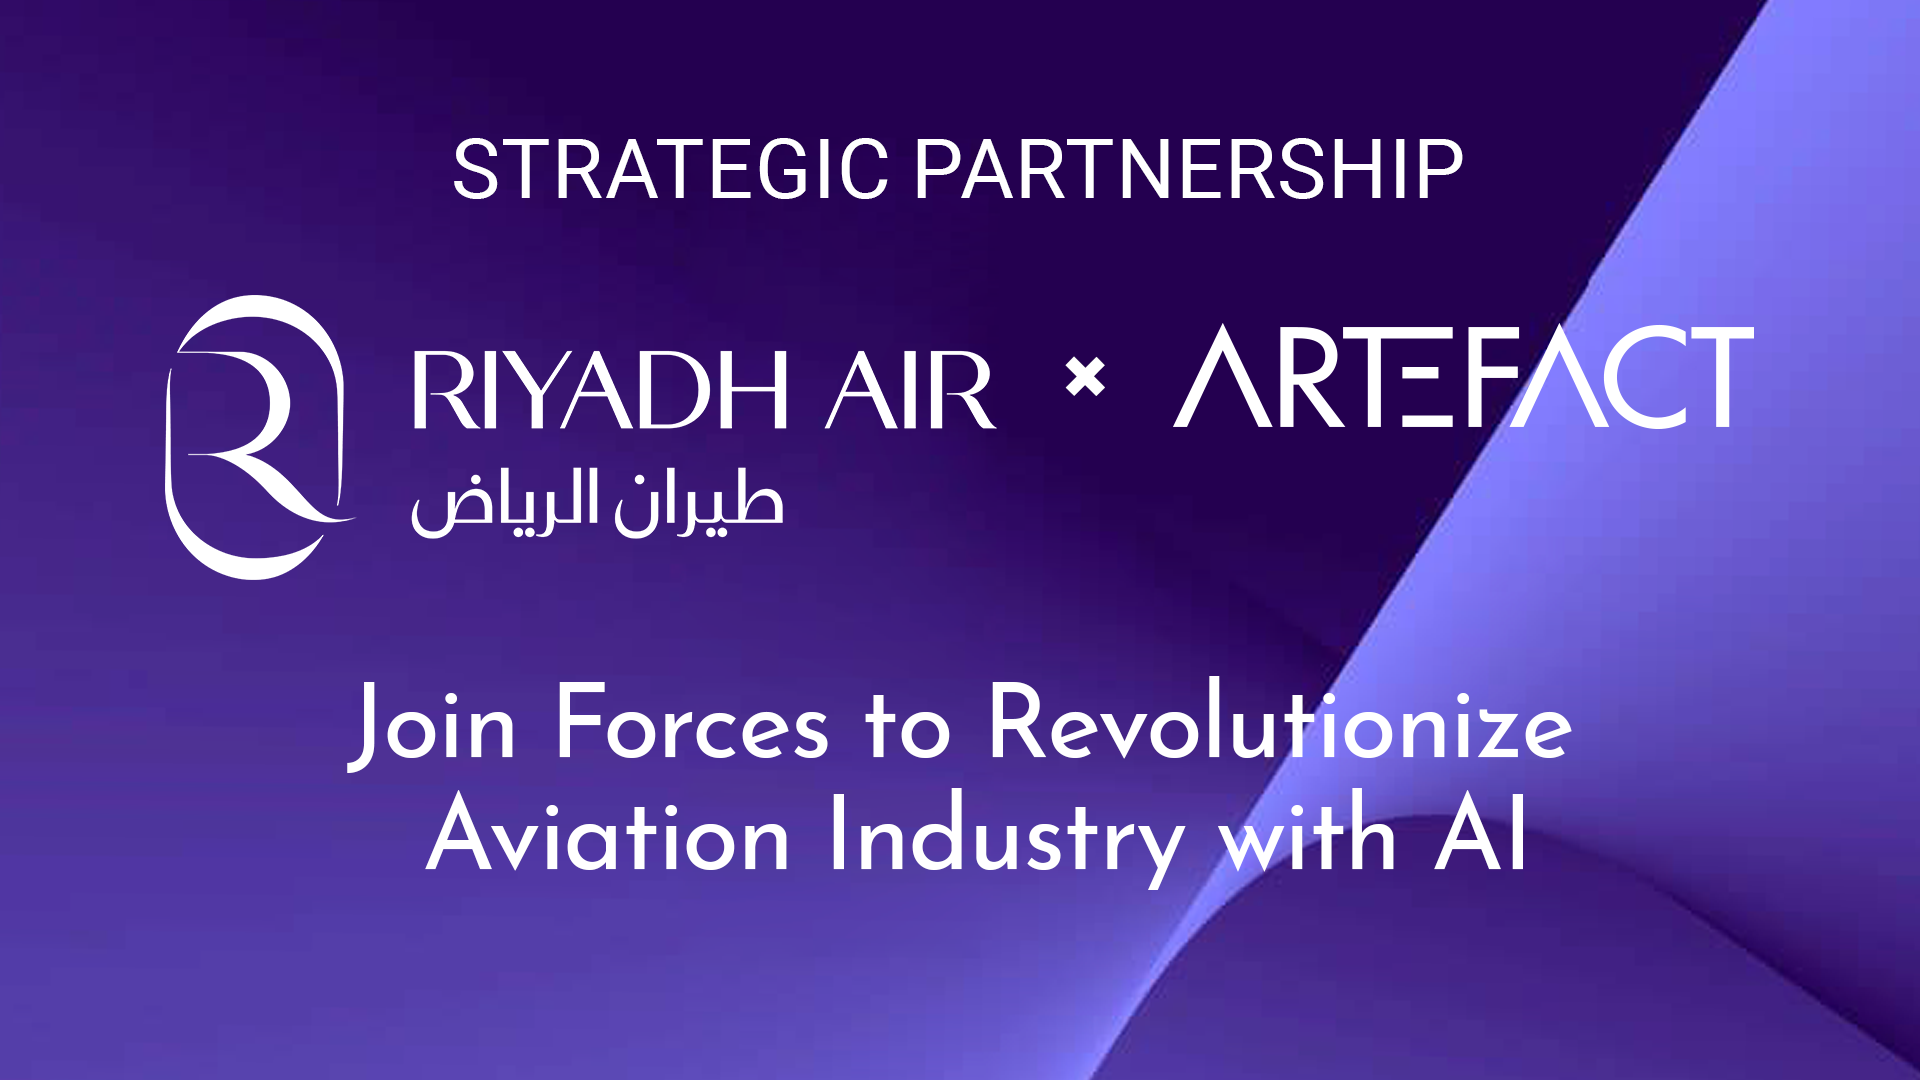 Artefact and Riyadh Air Join Forces to Revolutionize Aviation Industry with AI